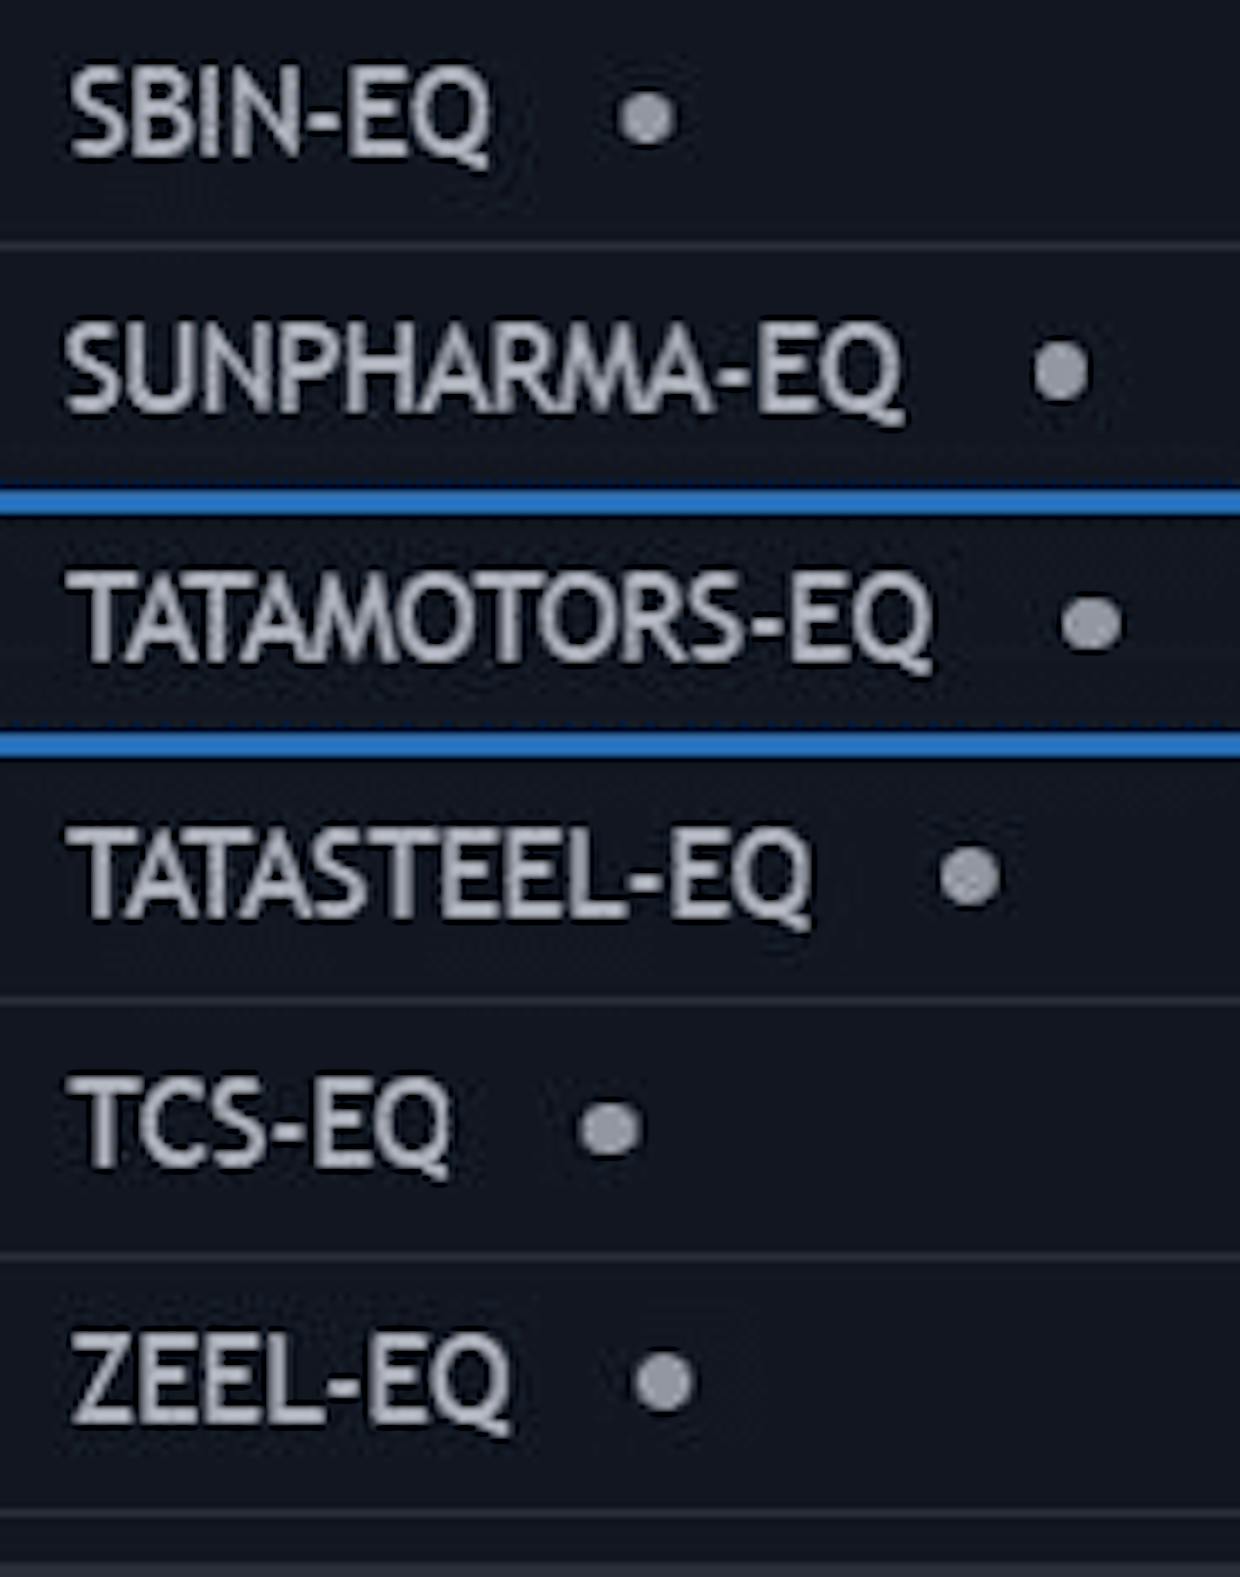 Are all nifty 100 stock options liquid enough for near itm intraday trade ?how much percentage slippage is considered ok in  stock options to be considered liquid for intraday trade ?